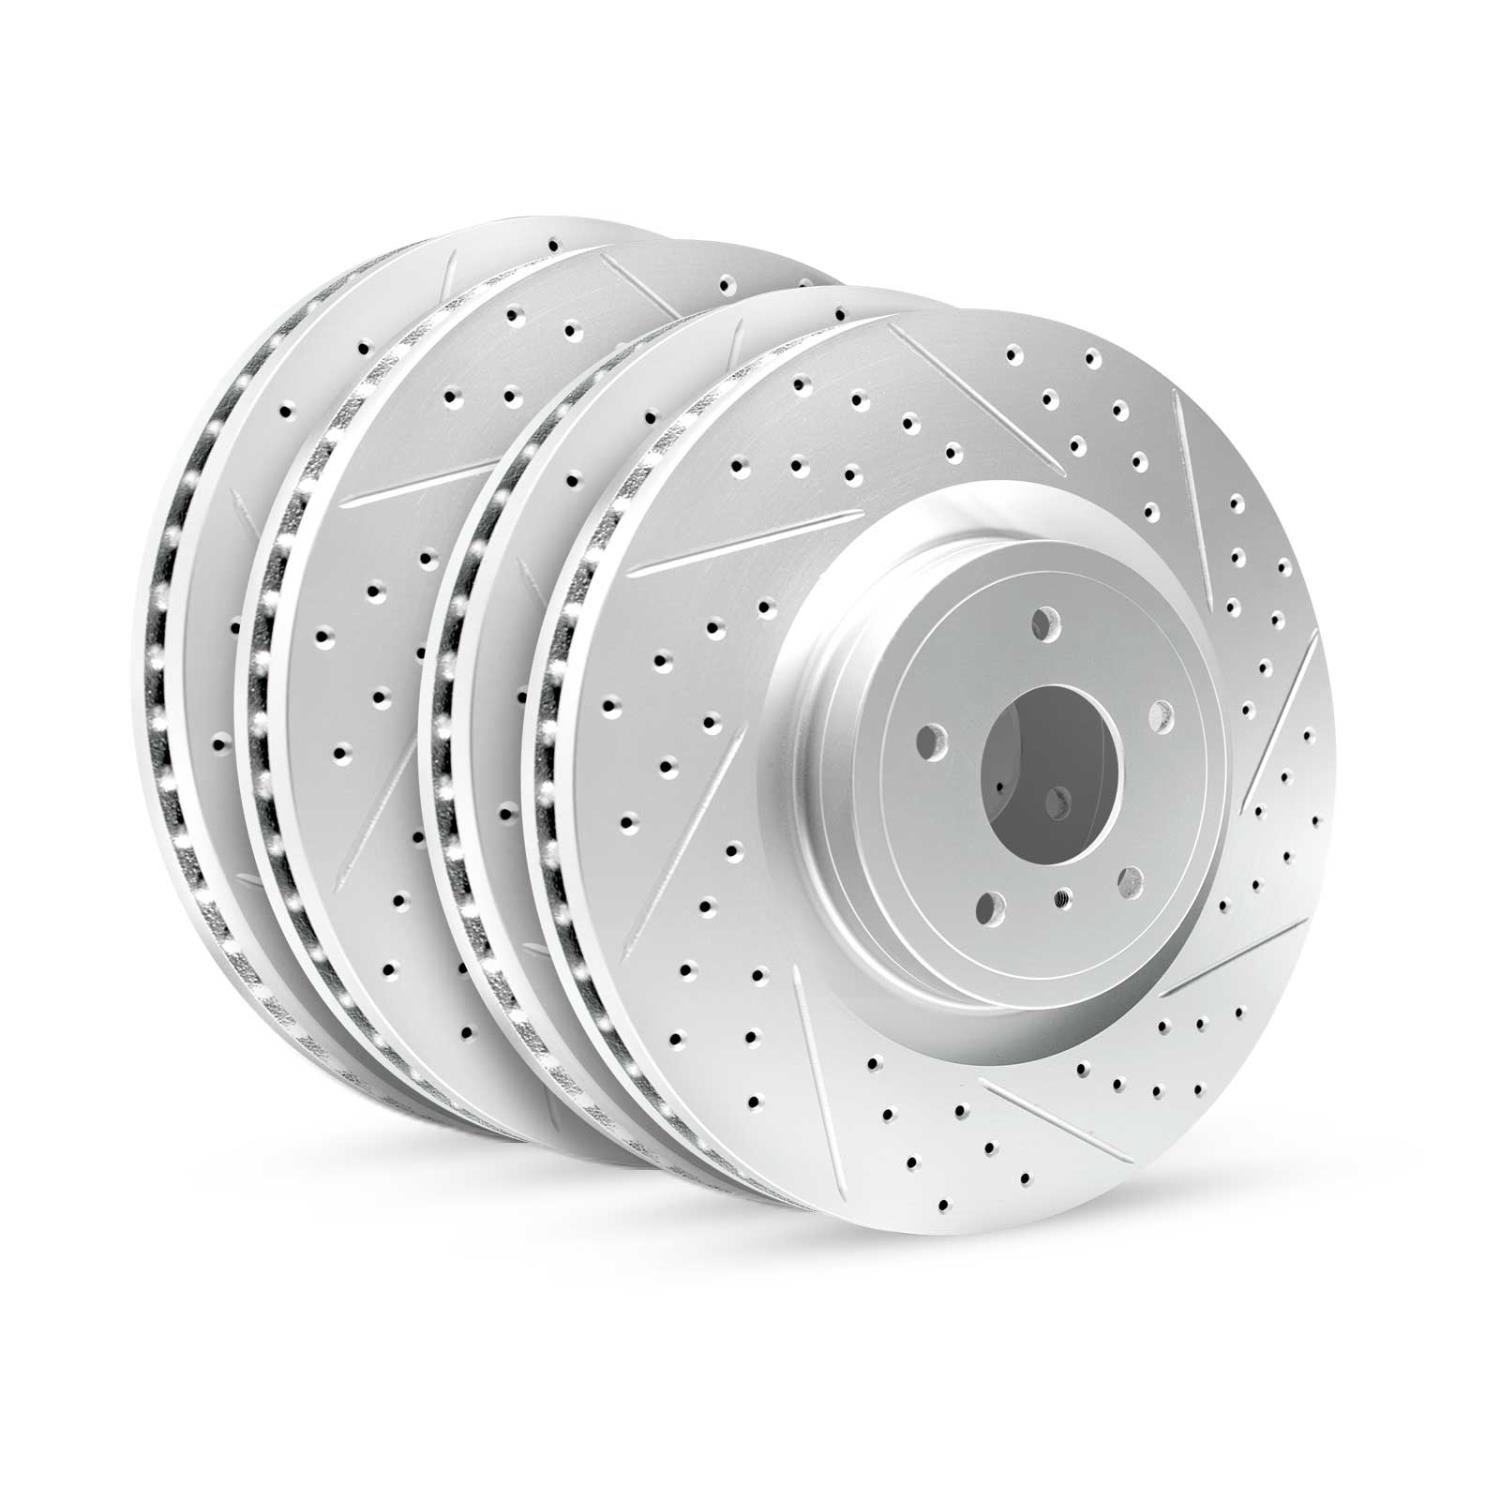 GEO-Carbon Drilled/Slotted Rotors, 2000-2007 Fits Multiple Makes/Models, Position: Front/Rear